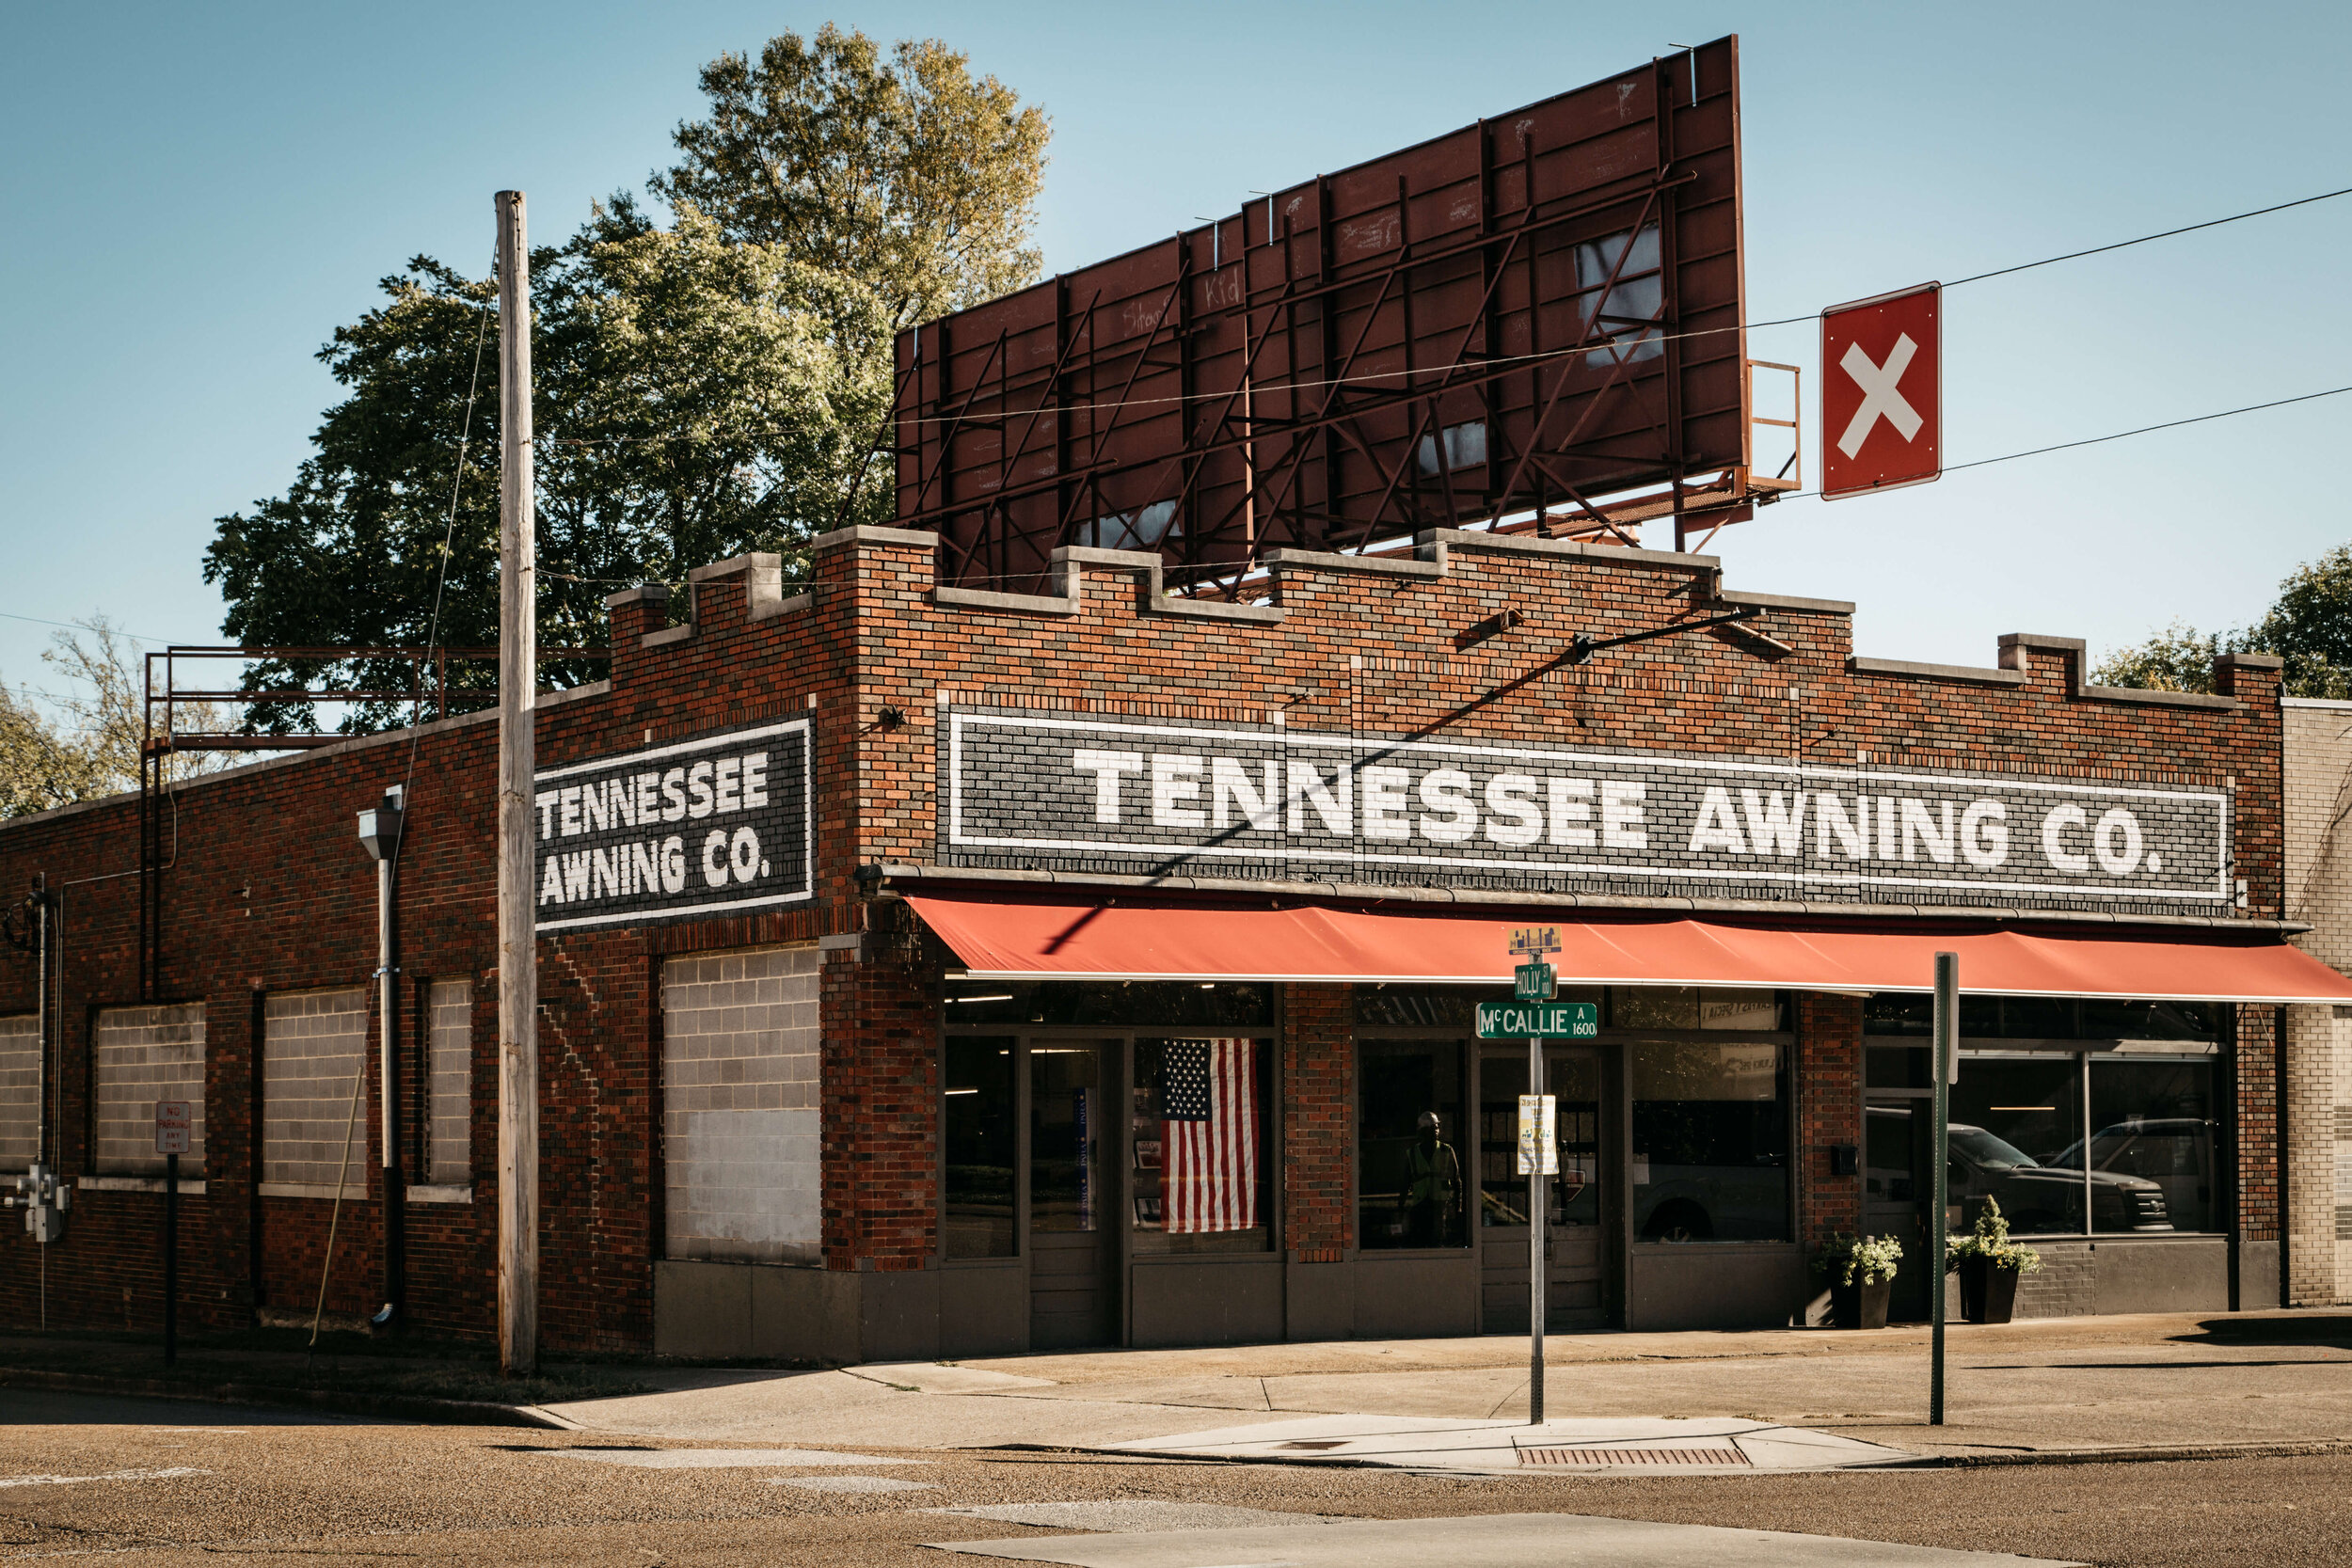 Tennessee Awning Co.